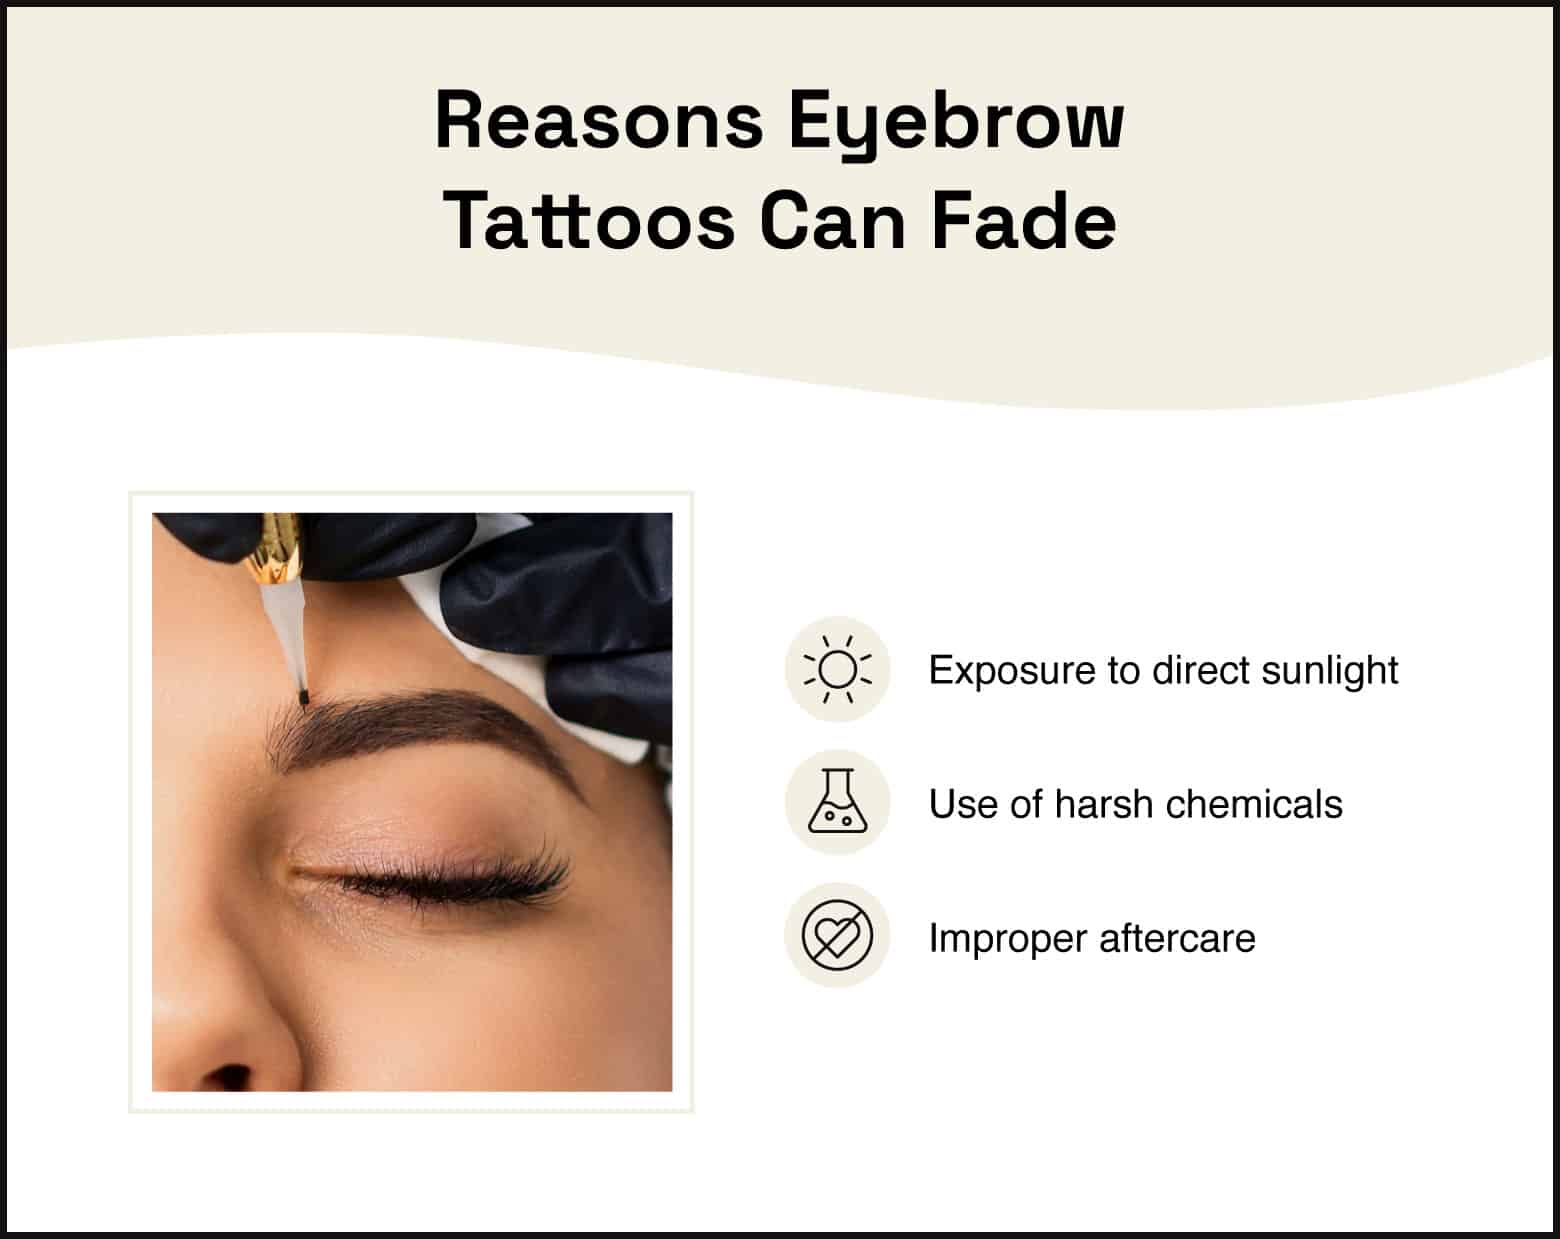  A photo of a woman getting her eyebrow tattooed is paired with a list of the reasons why an eyebrow tattoo can fade. 